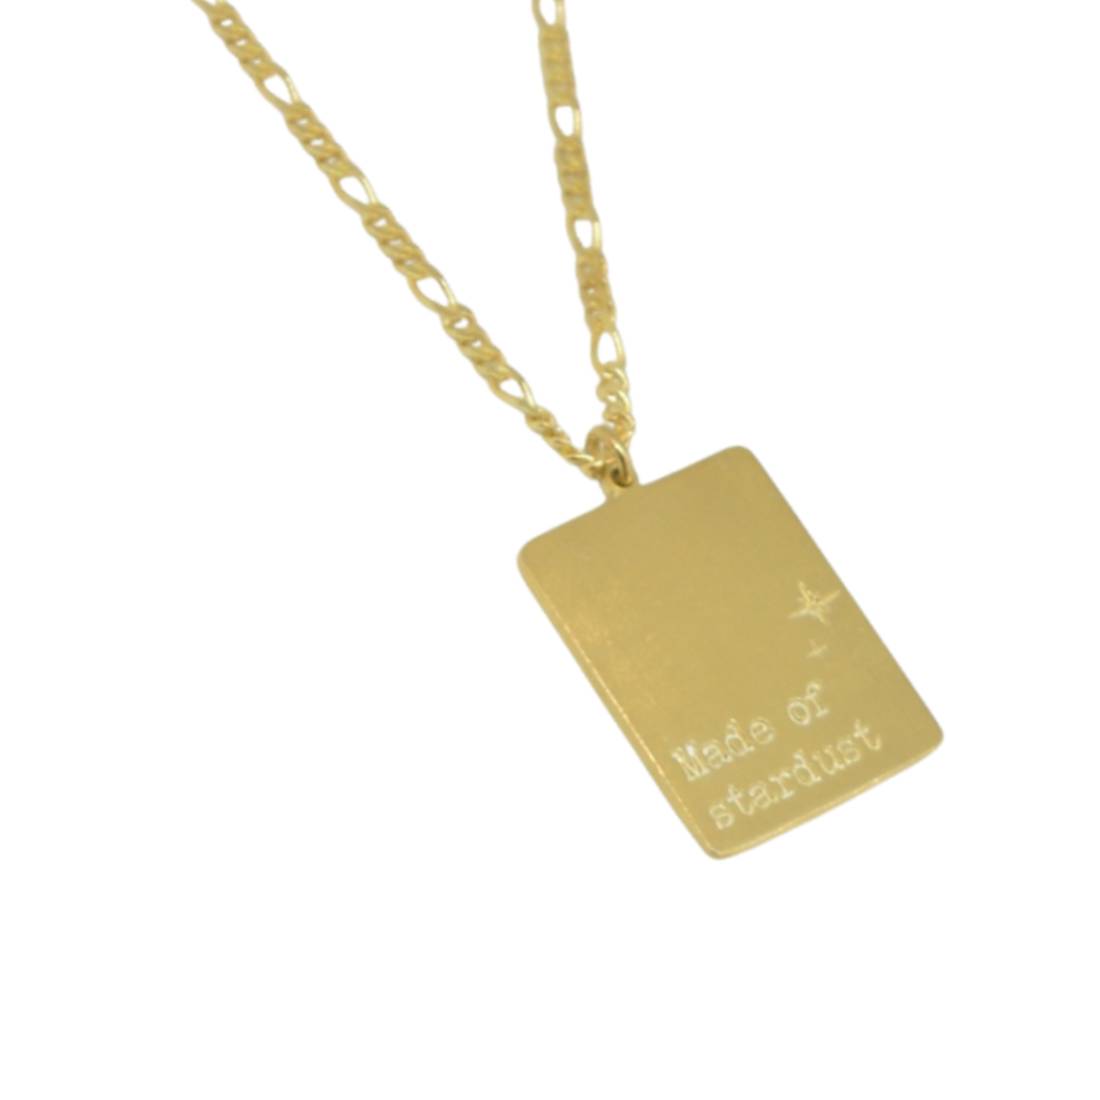 Made of stardust II gold plated necklace